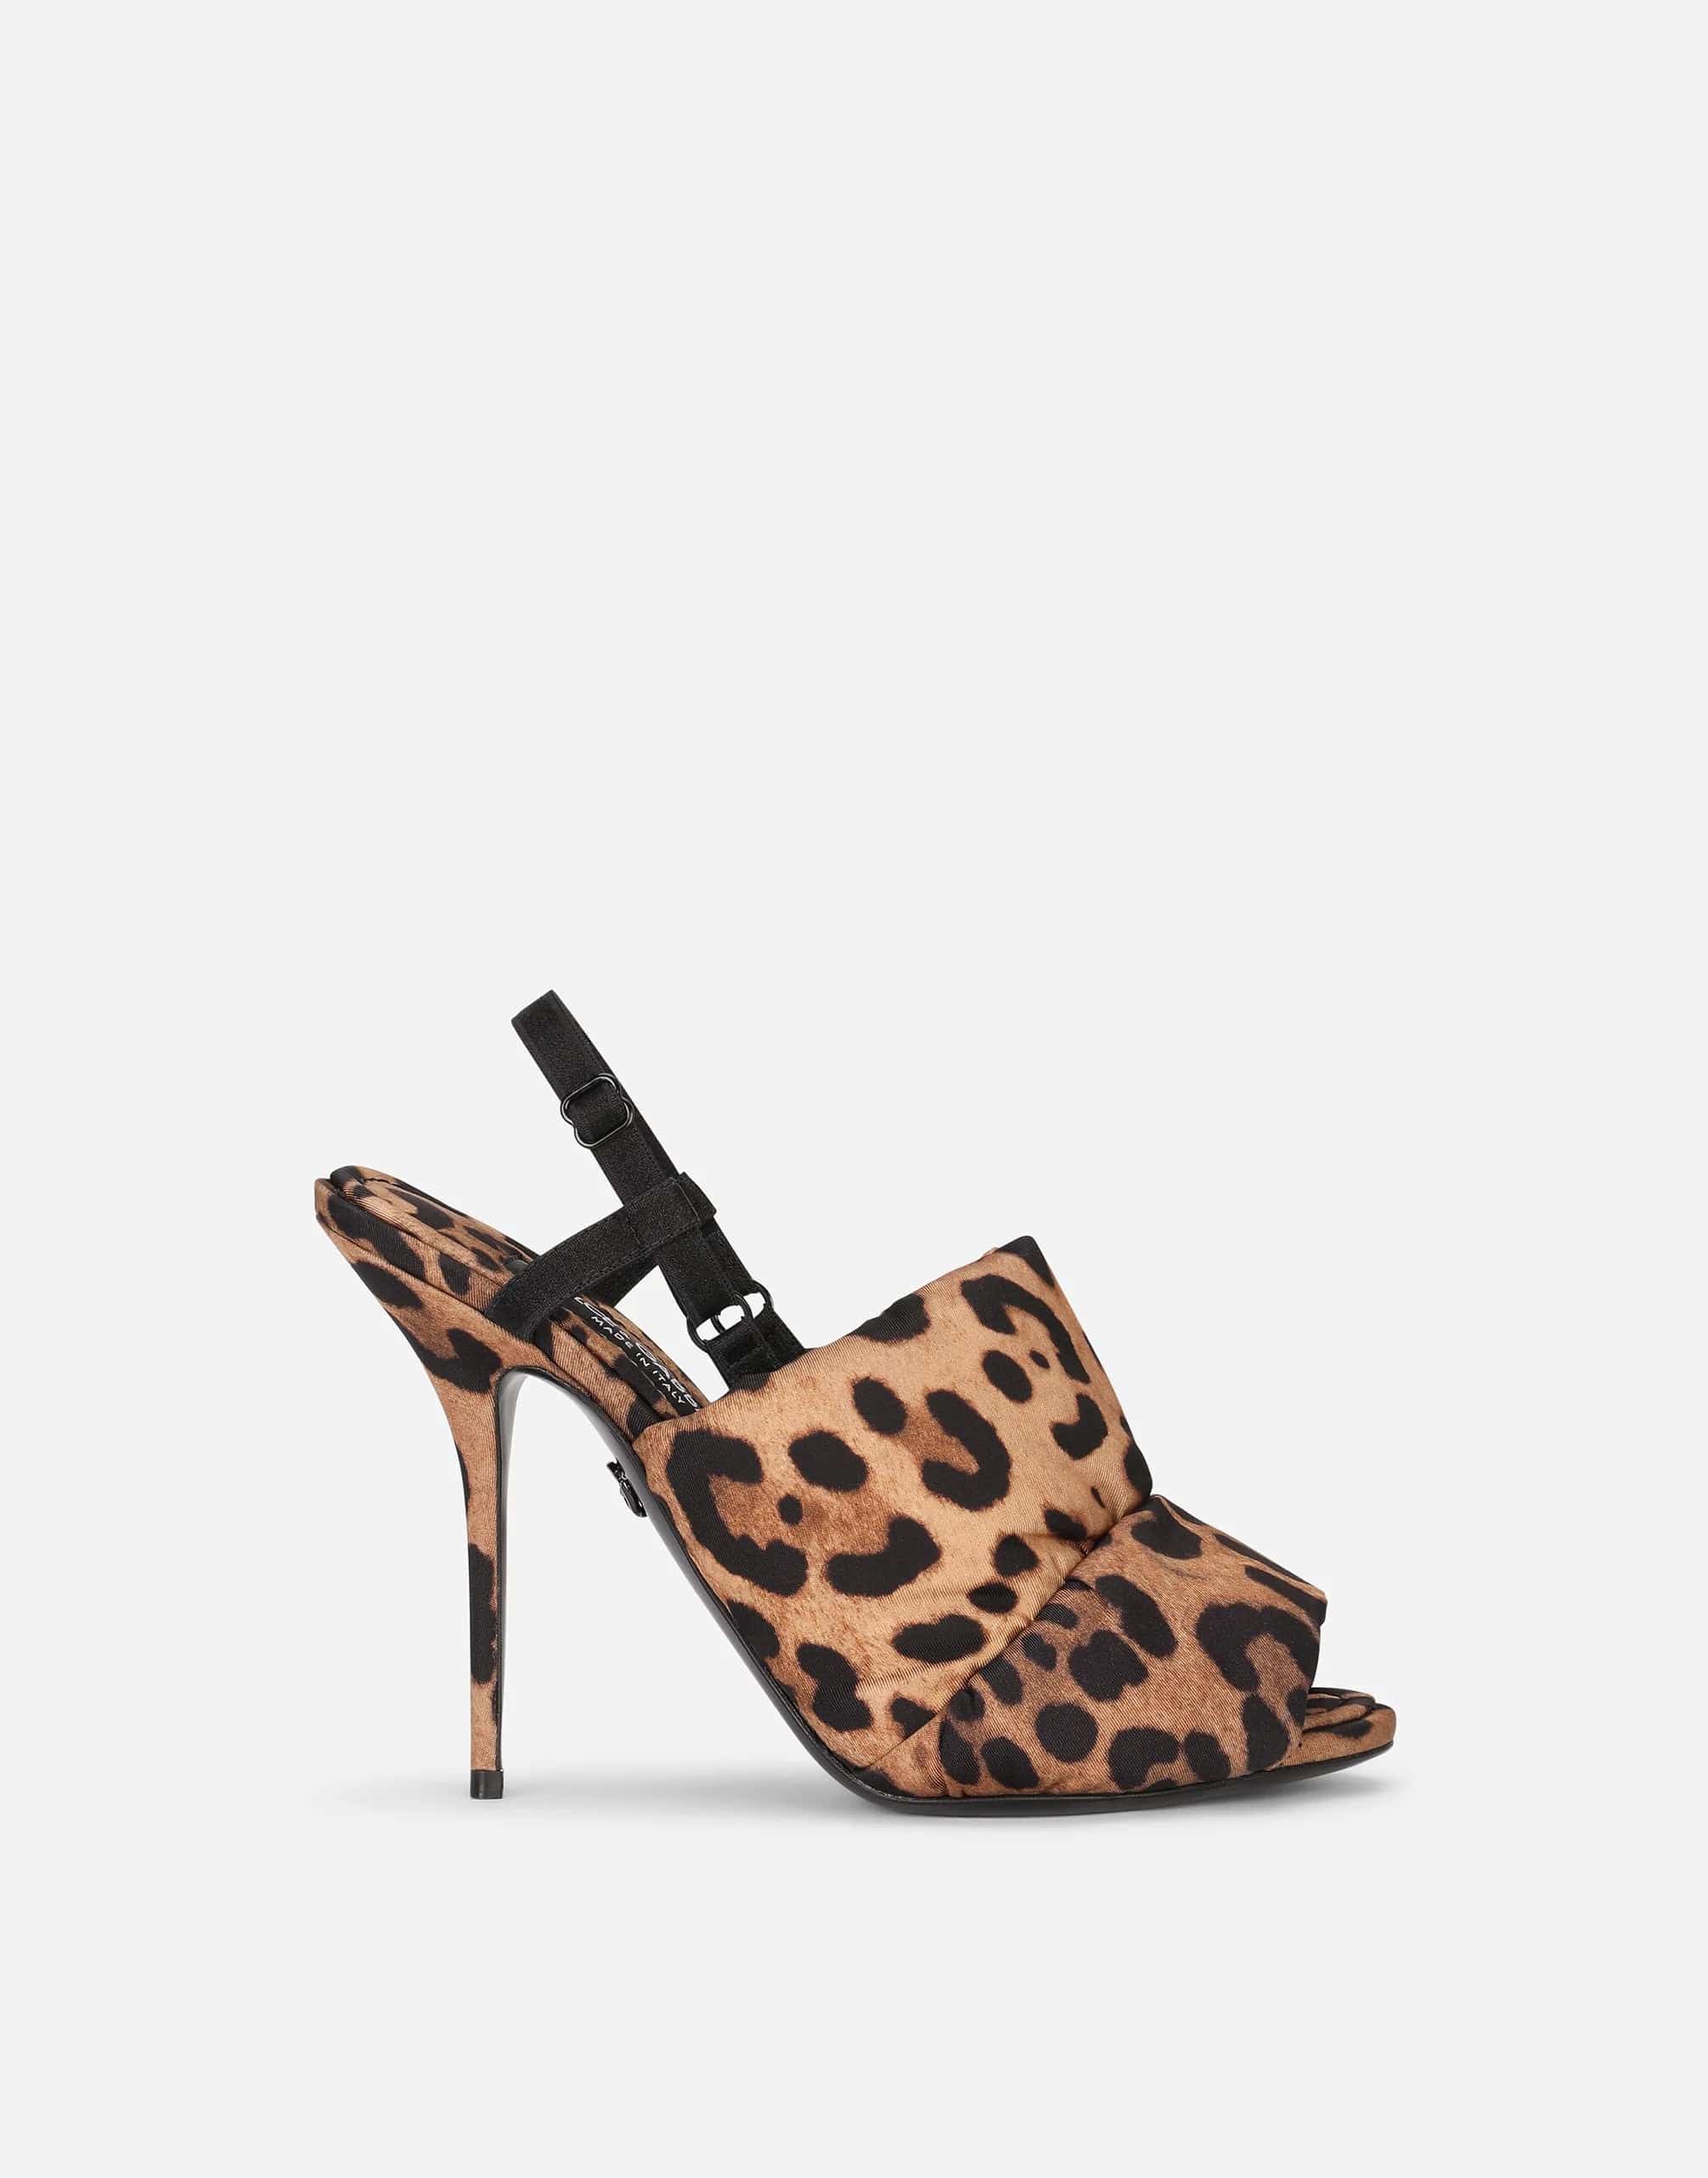 Dolce & Gabbana Quilted Leopard-Print Nylon Sandals